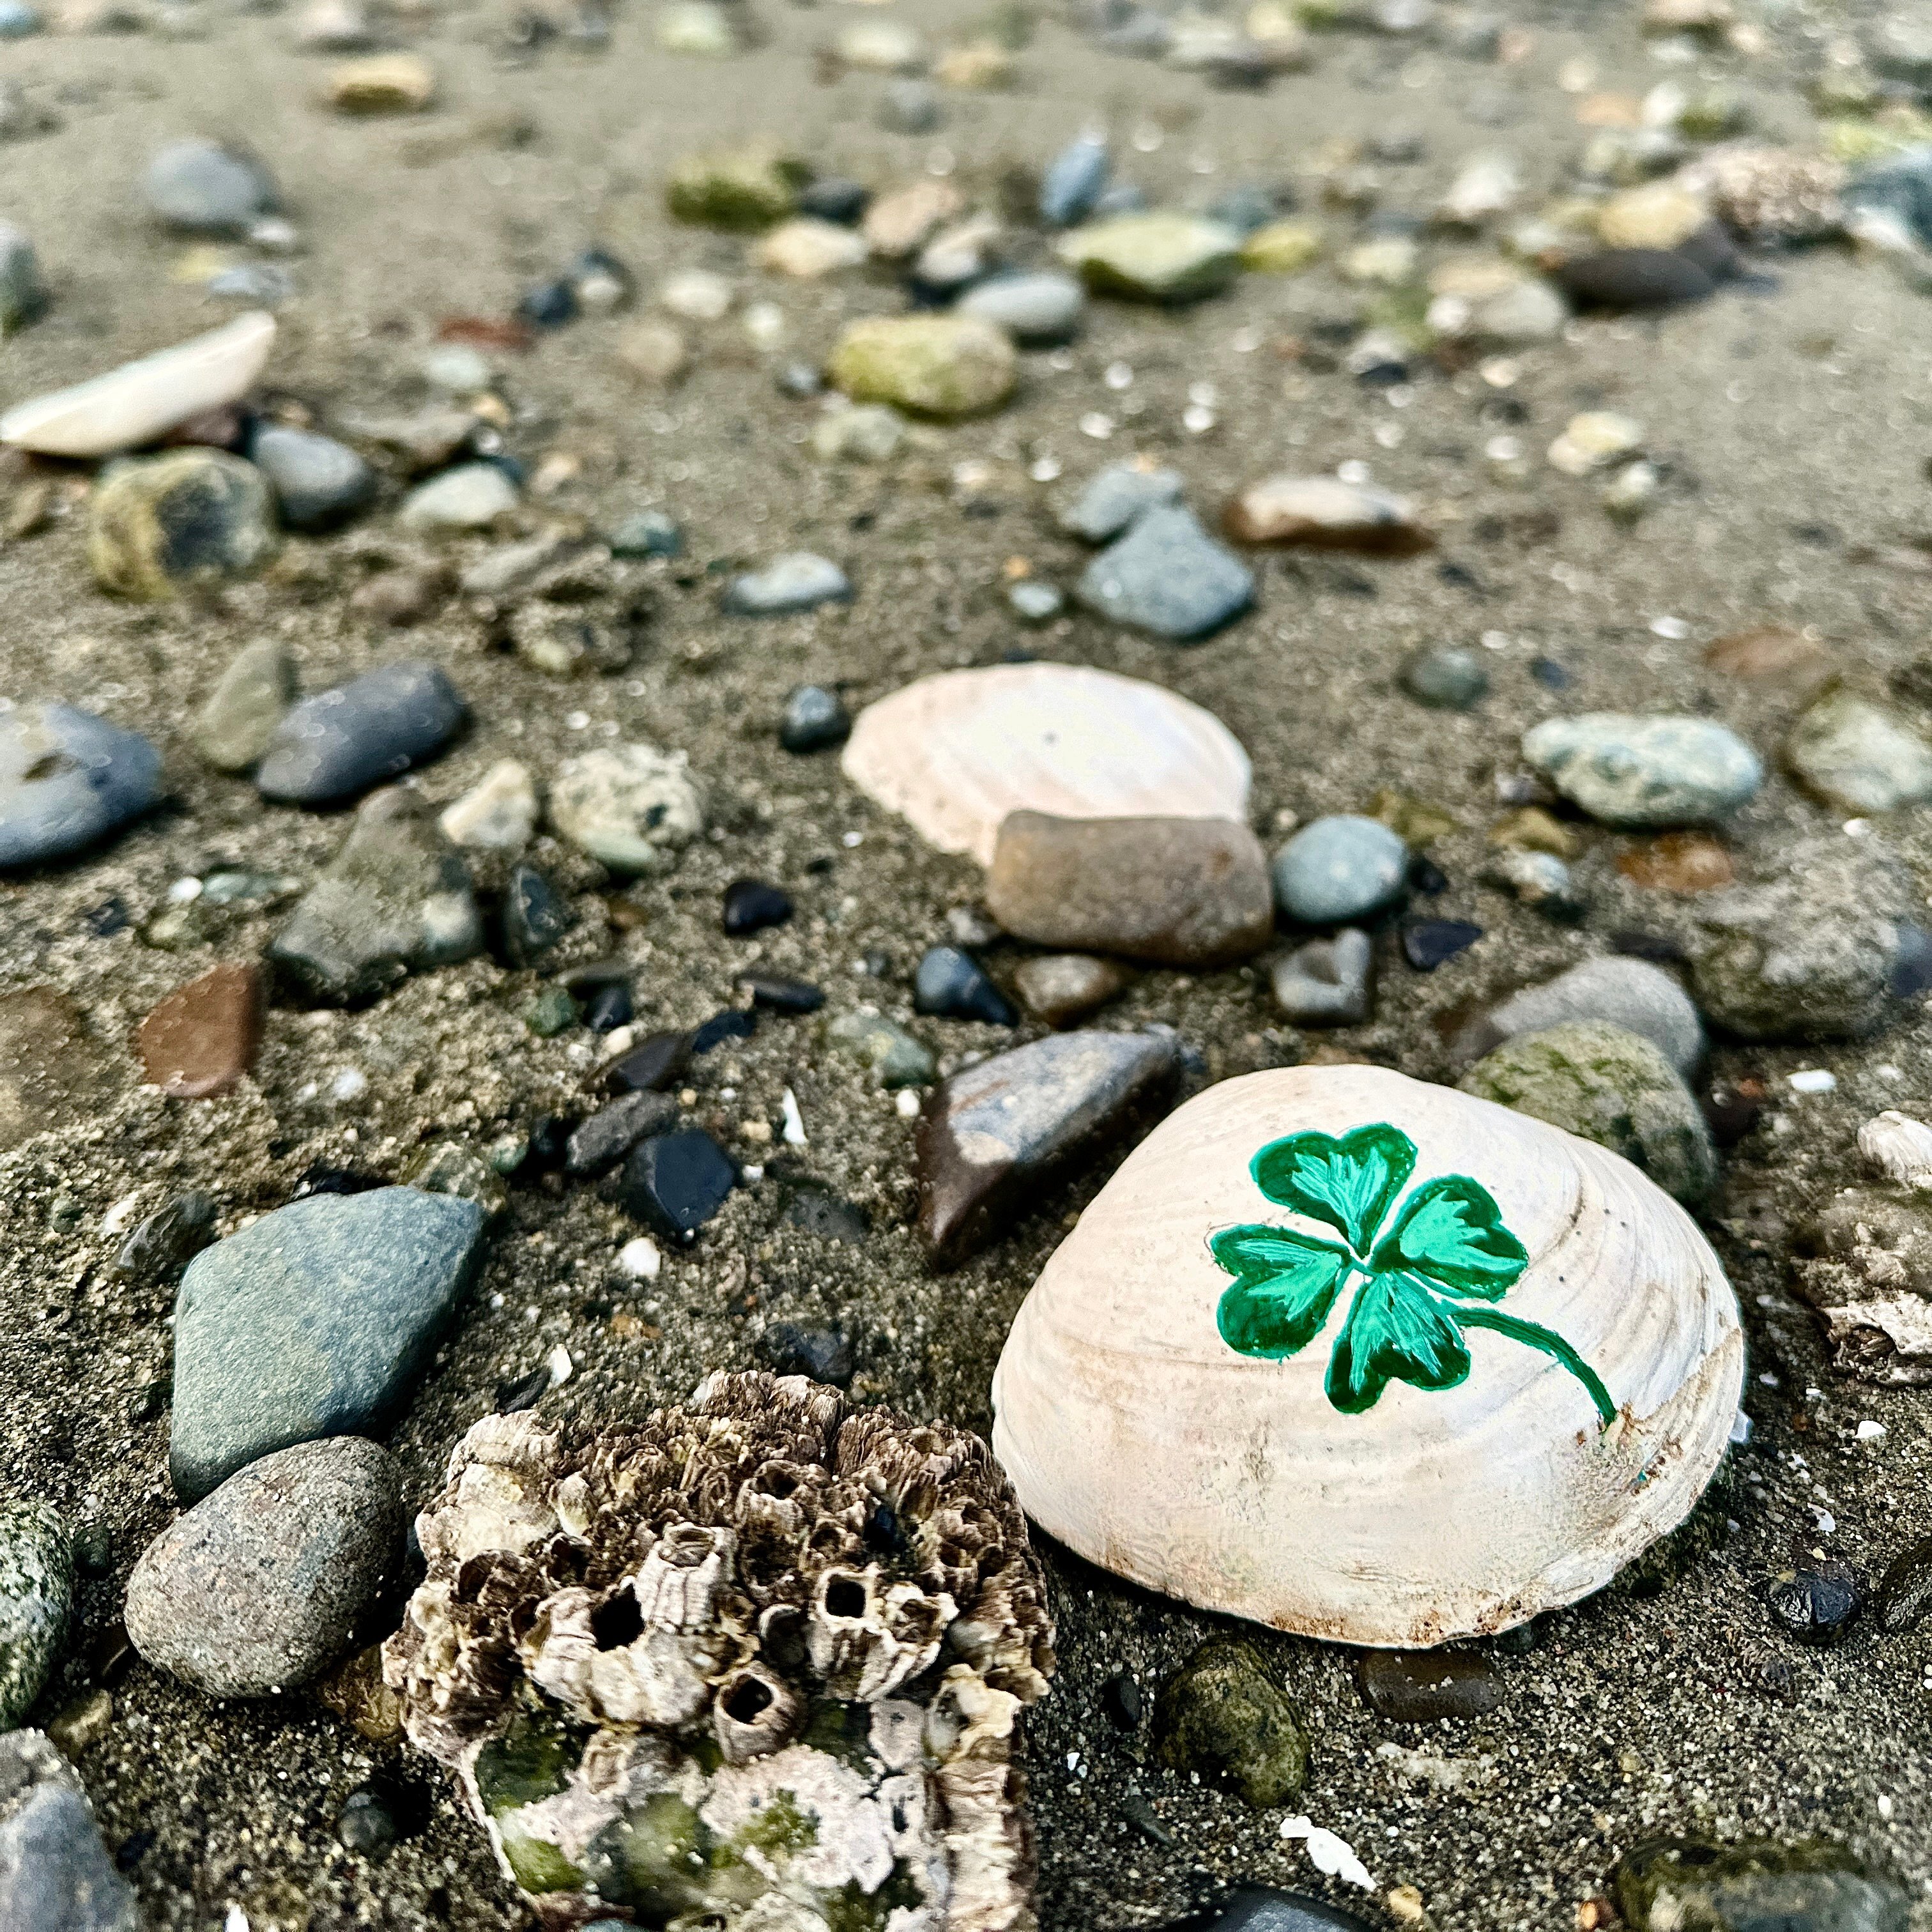 Sea shell on the beach with a 4 leaf clover painted on it